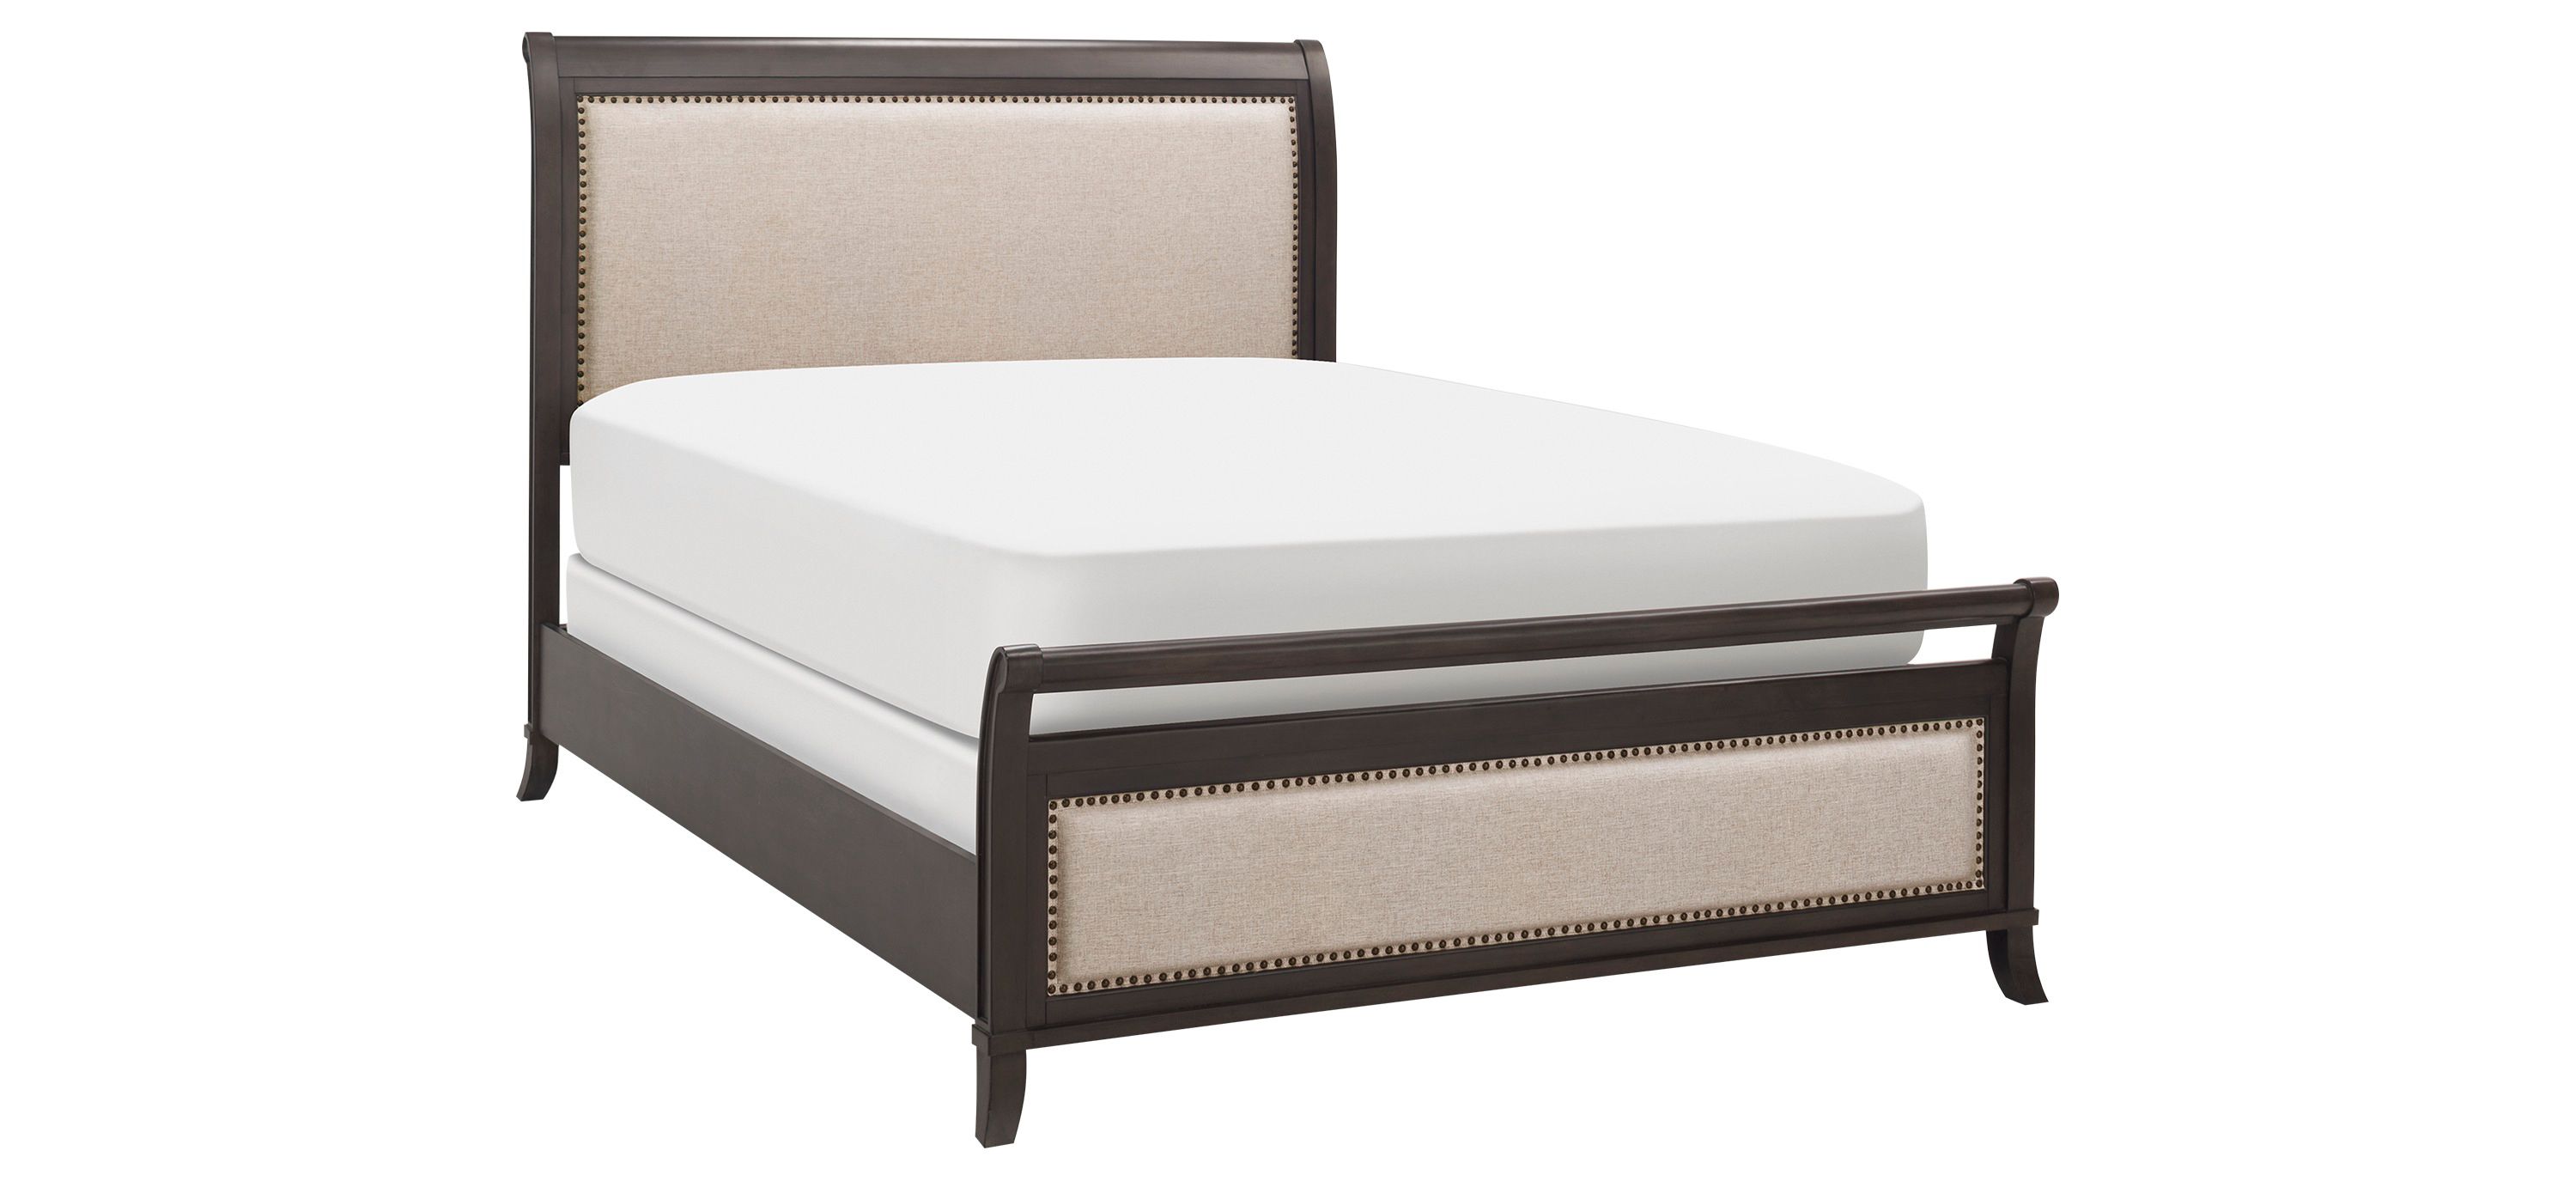 Union City Upholstered Bed